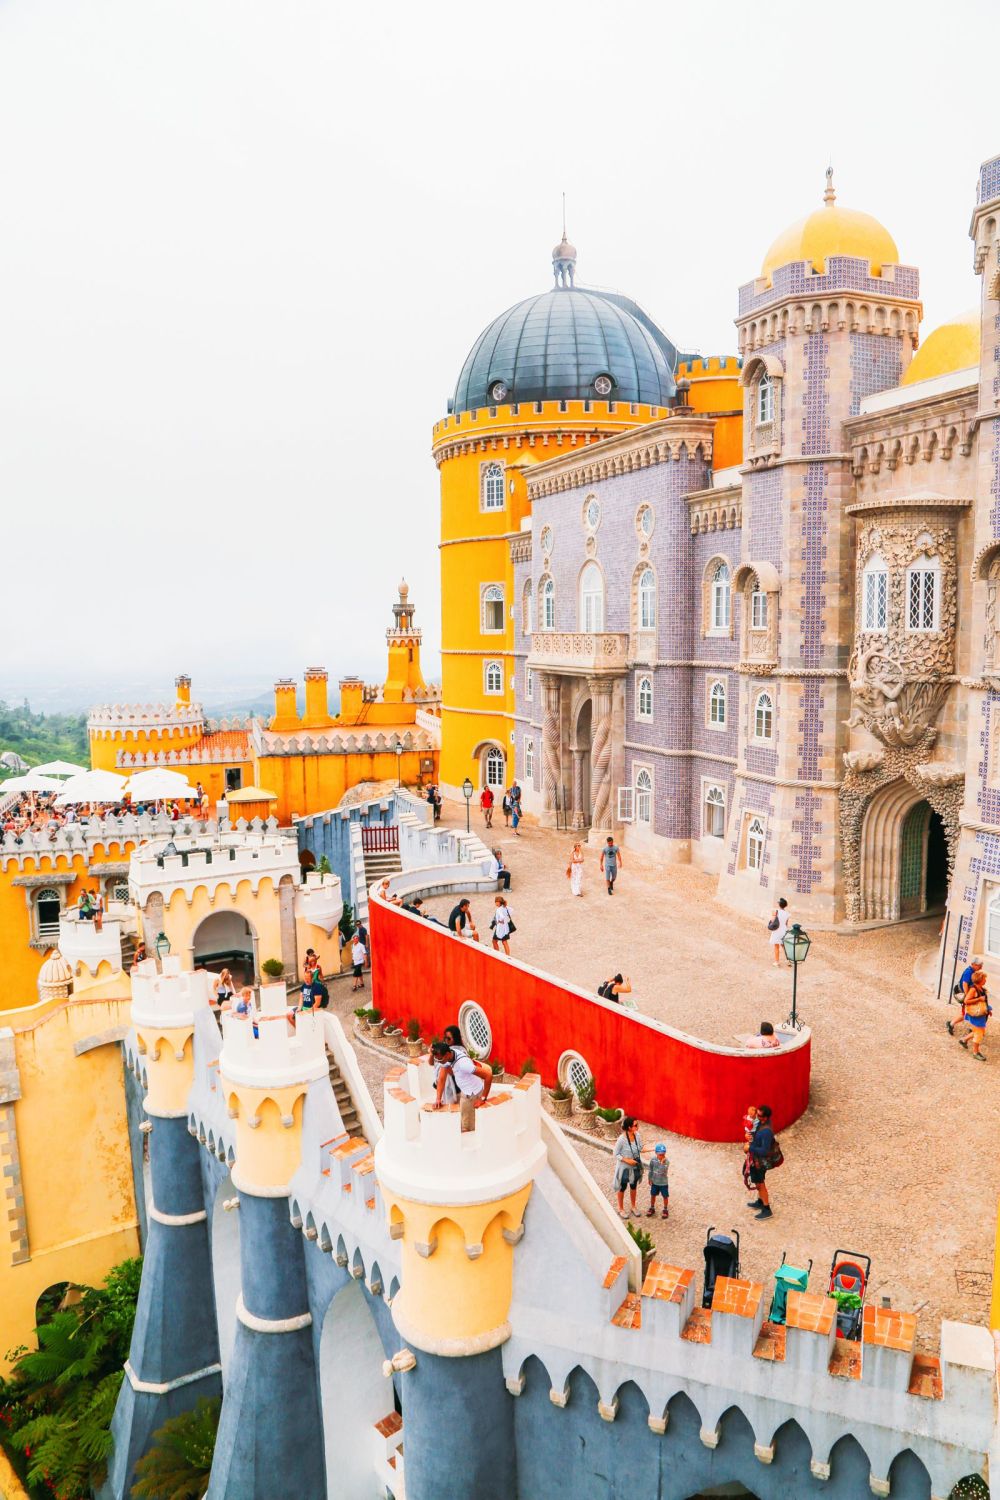 The Beautiful Pena Palace Of Sintra, Portugal (58)